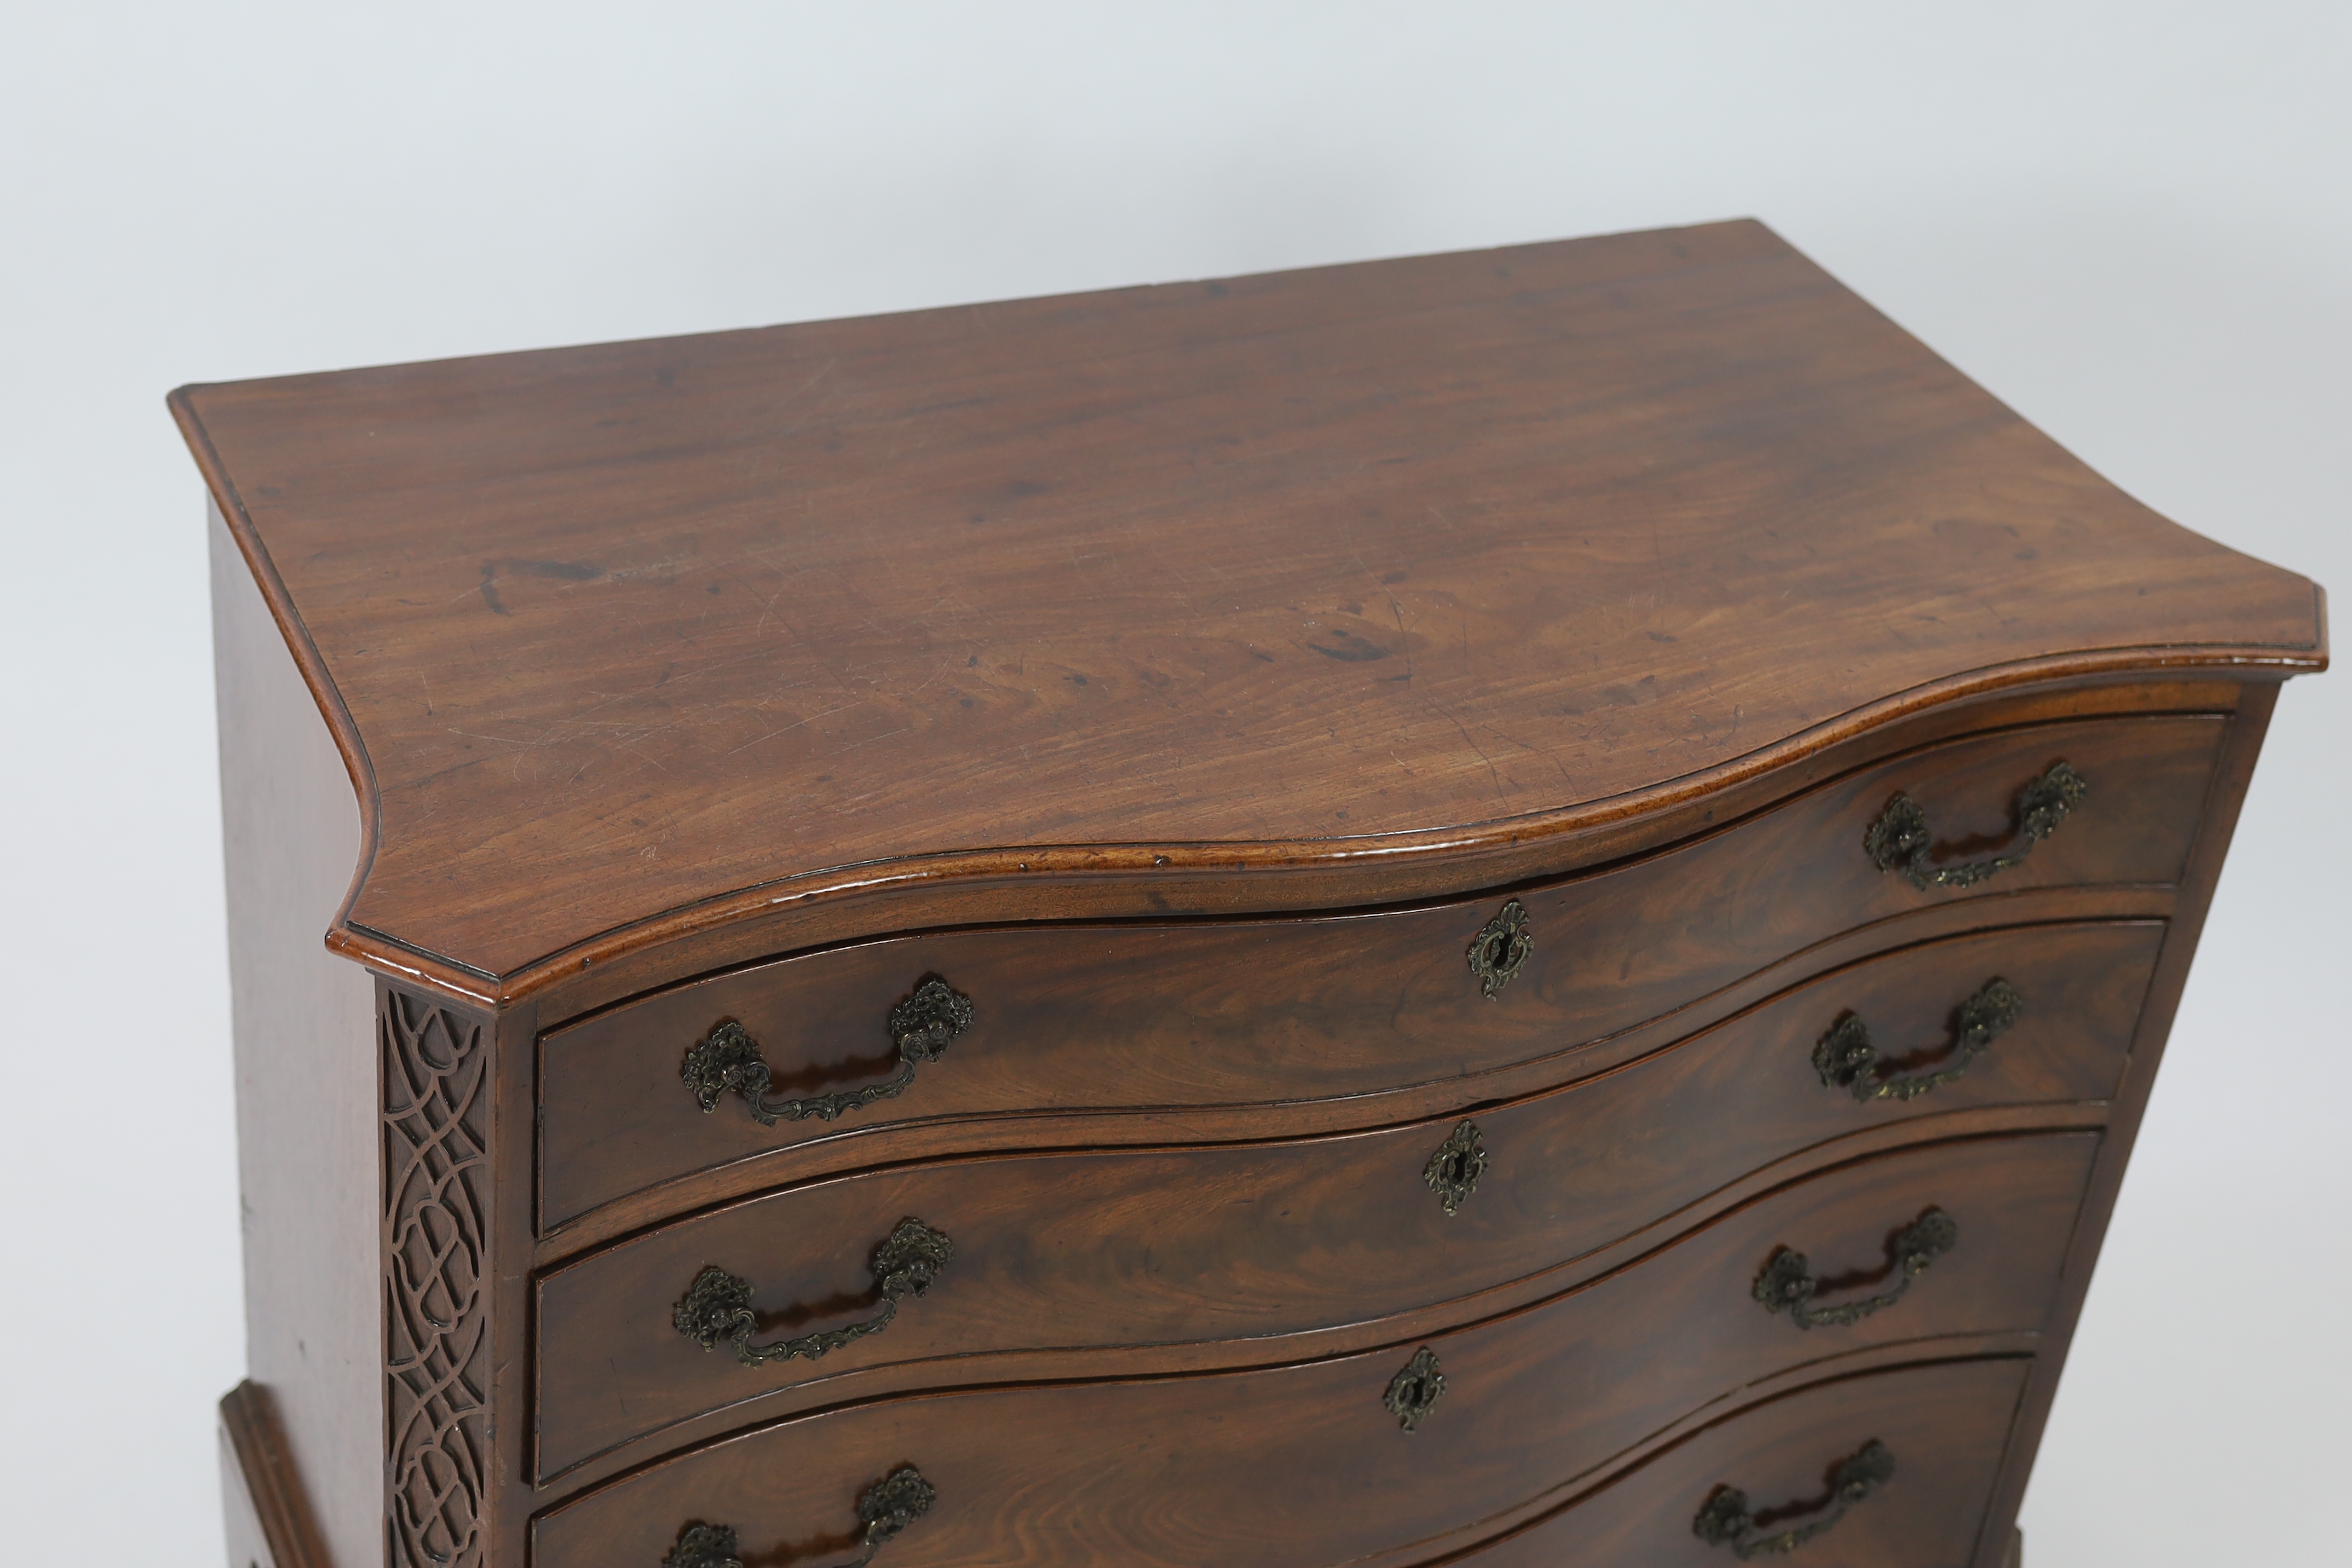 A George III Chippendale serpentine mahogany chest